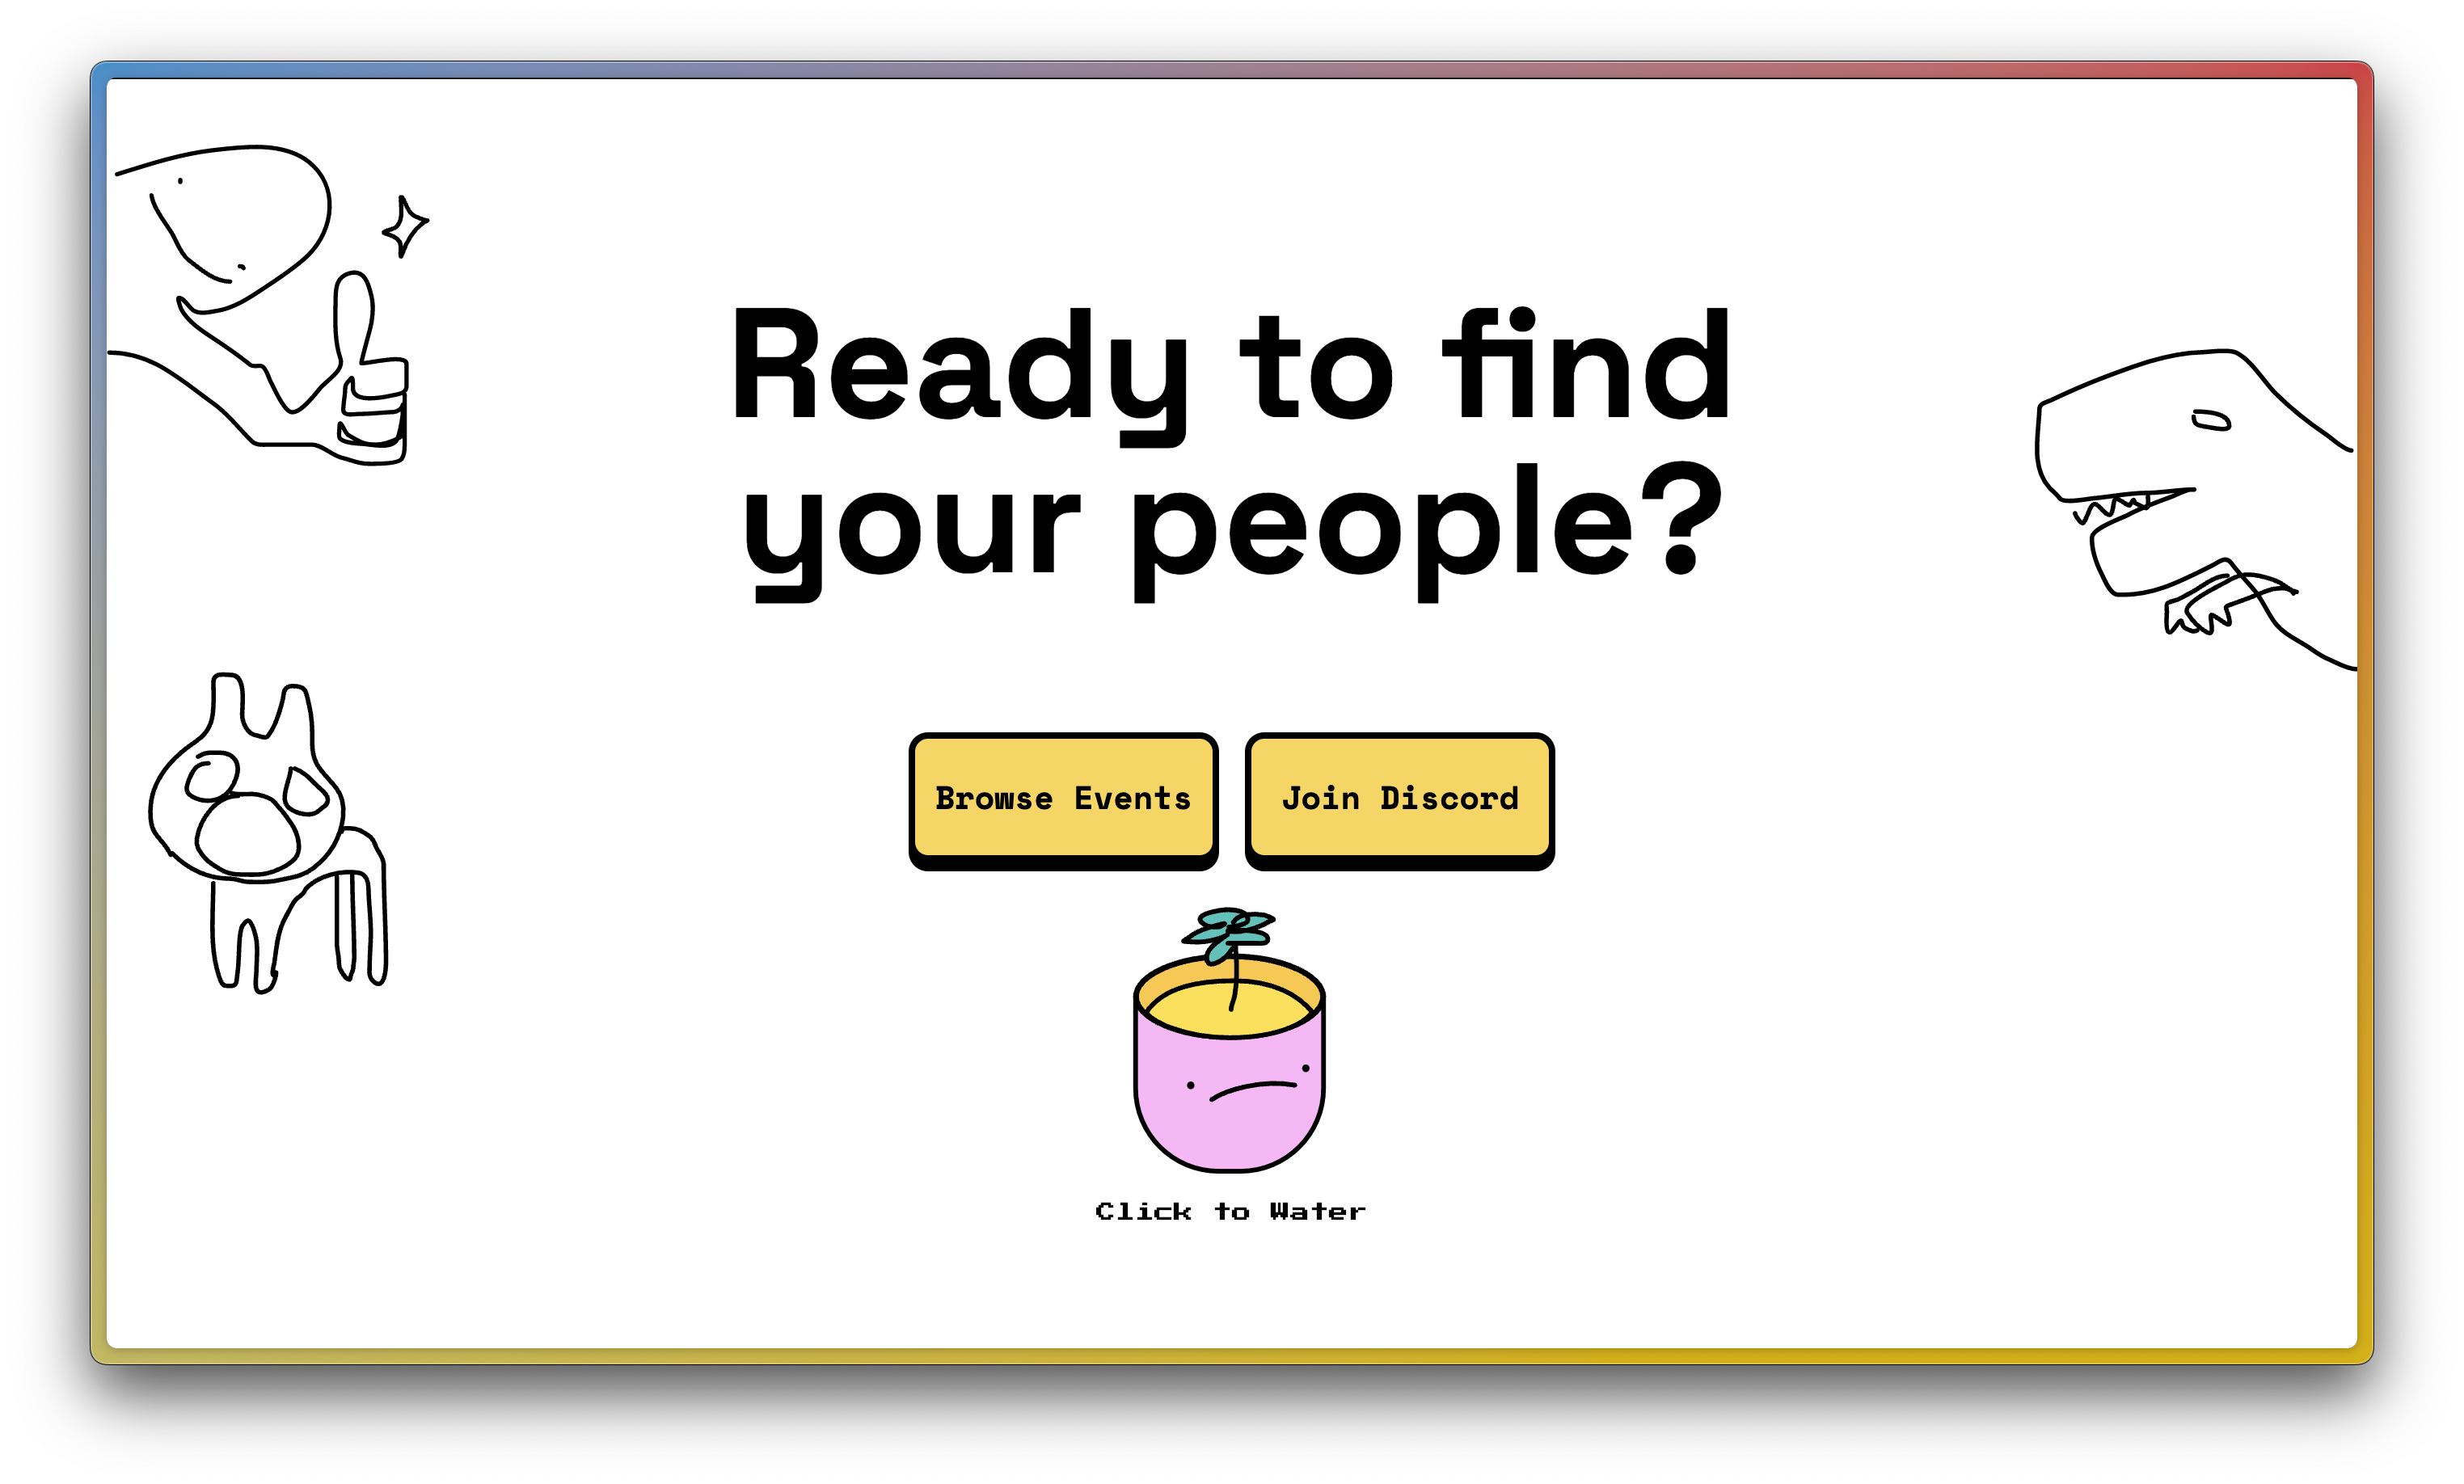 screenshot of a website with poorly-drawn characters–a weird looking human, a t-rex, and a ghost cat—throughout, with large text saying "ready to find your people?" and two buttons under it that say "browse events" and "join discord"